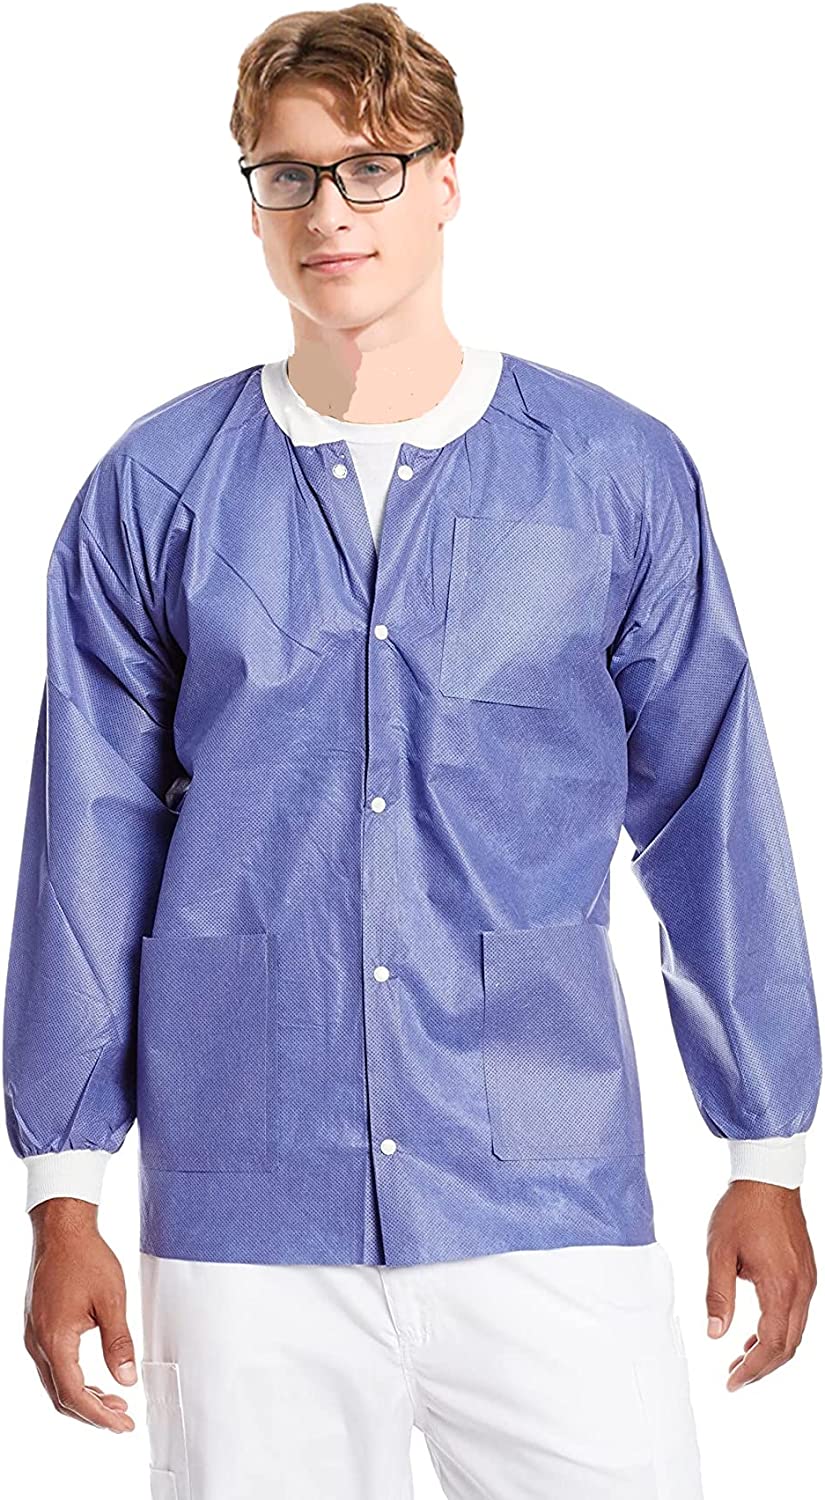 Navy Disposable Lab Jackets